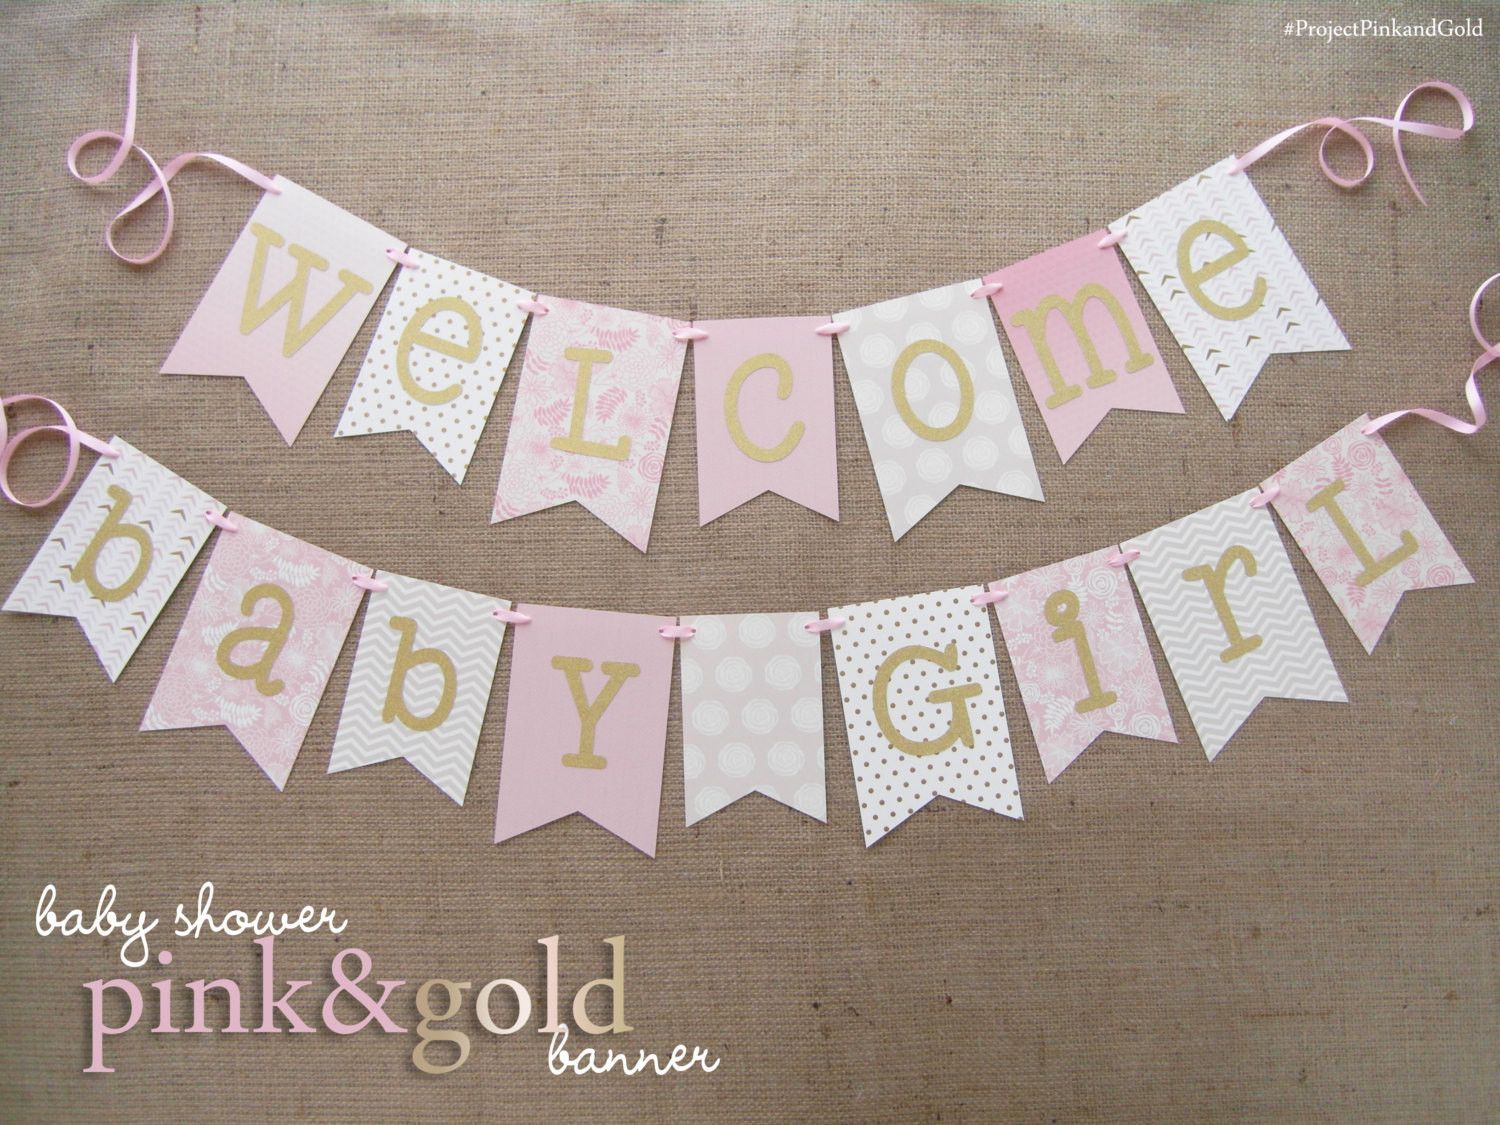 Full Size of Baby Shower:89+ Indulging Baby Shower Banner Picture Inspirations Baby Shower Banner Baby Shower De Baby Shower Kit Baby Shower Keepsakes Baby Shower Venues London Pink And Gold Baby Shower Banner Congratulations From